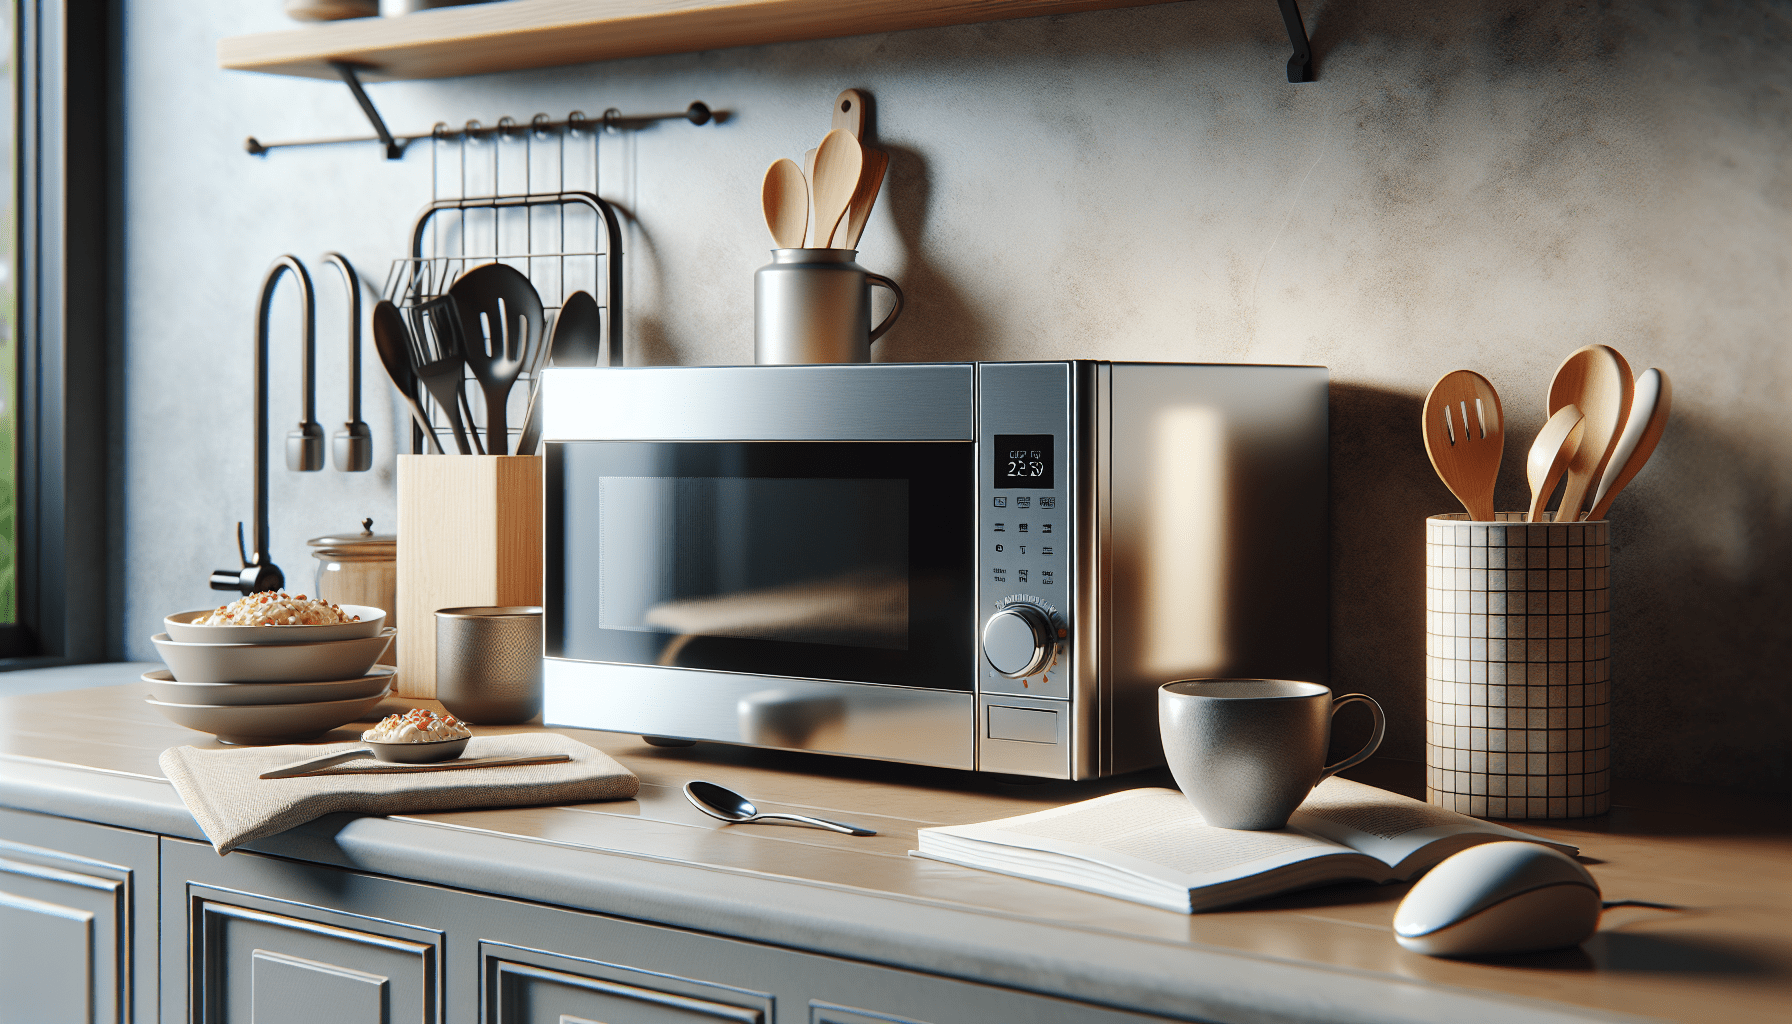 Can You Replace A Built-in Microwave With A Countertop Microwave?